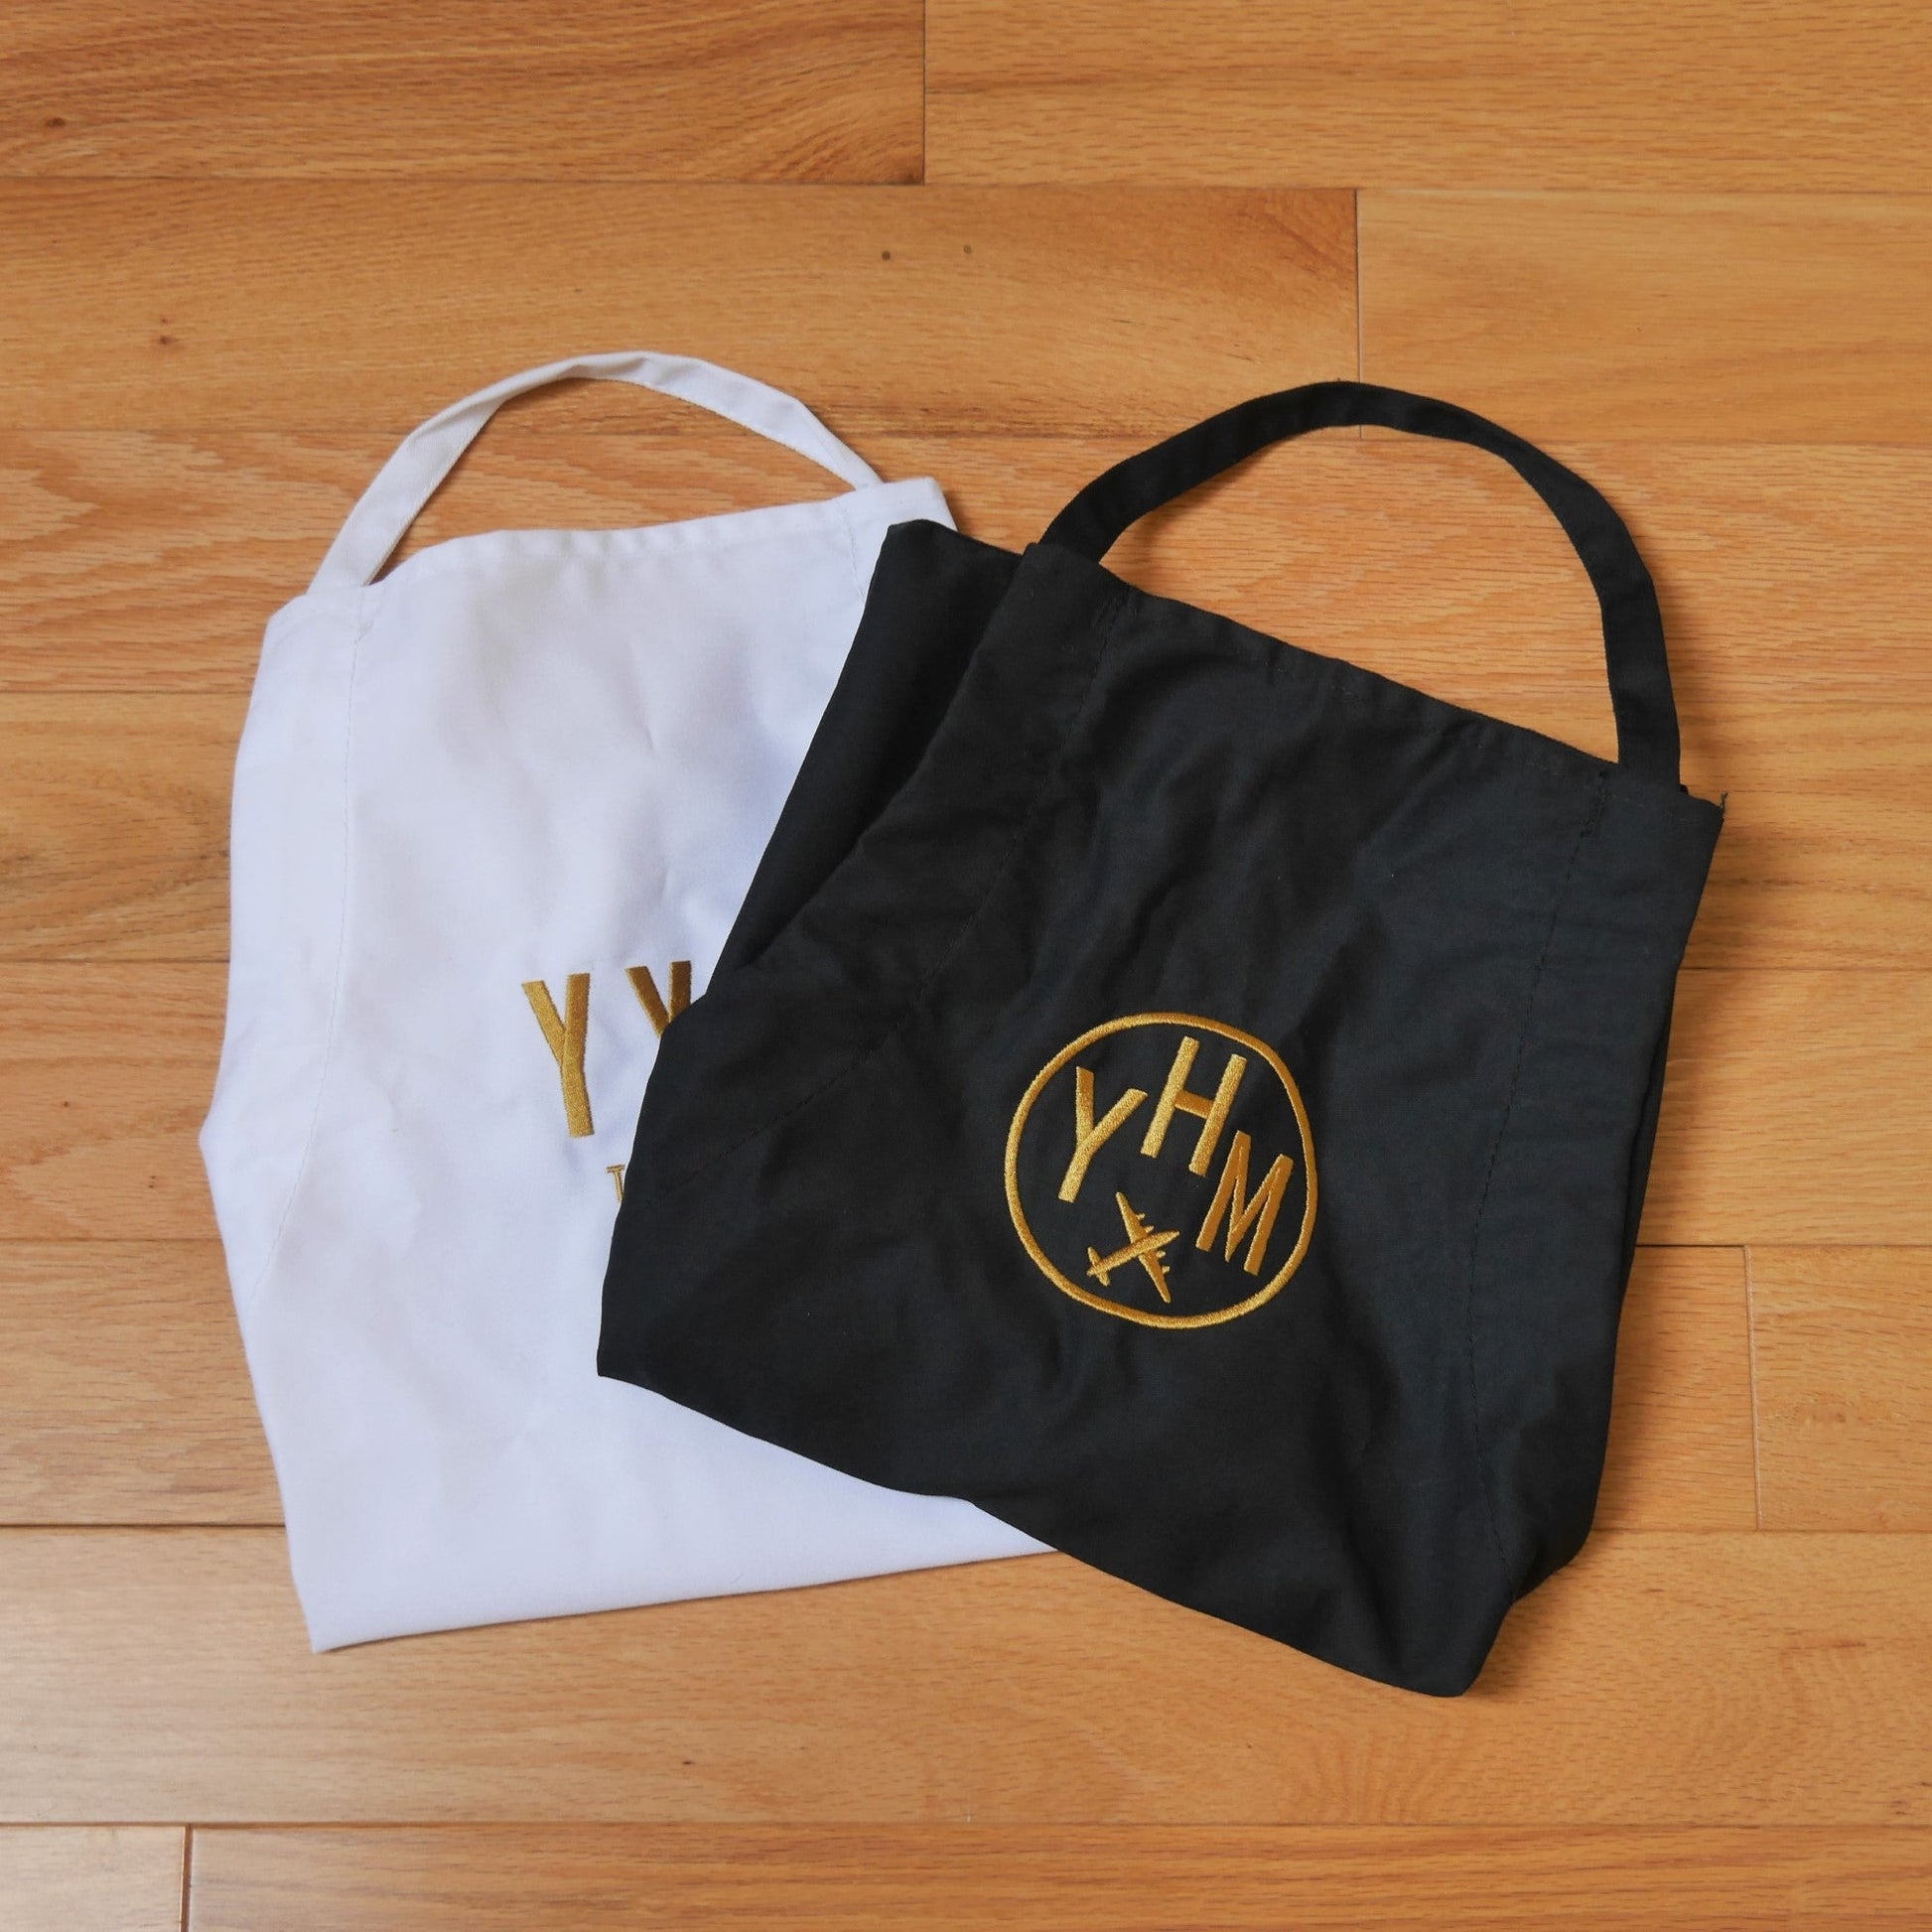 City Embroidered Apron - Old Gold • MSY New Orleans • YHM Designs - Image 14